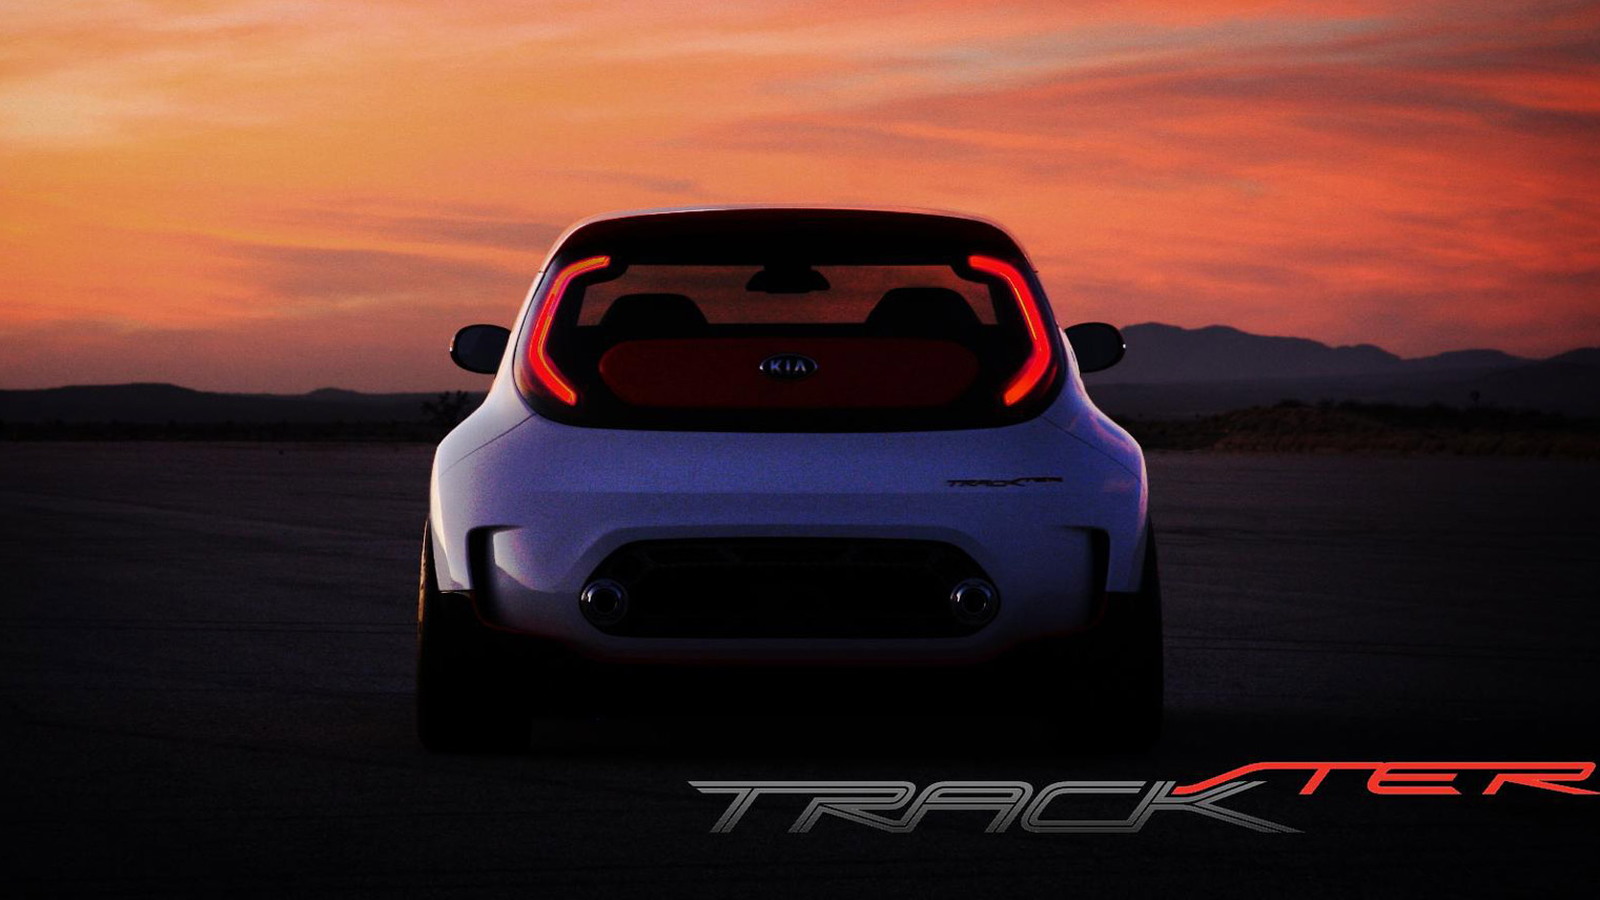 Second teaser for 2012 Kia Track-ster Concept